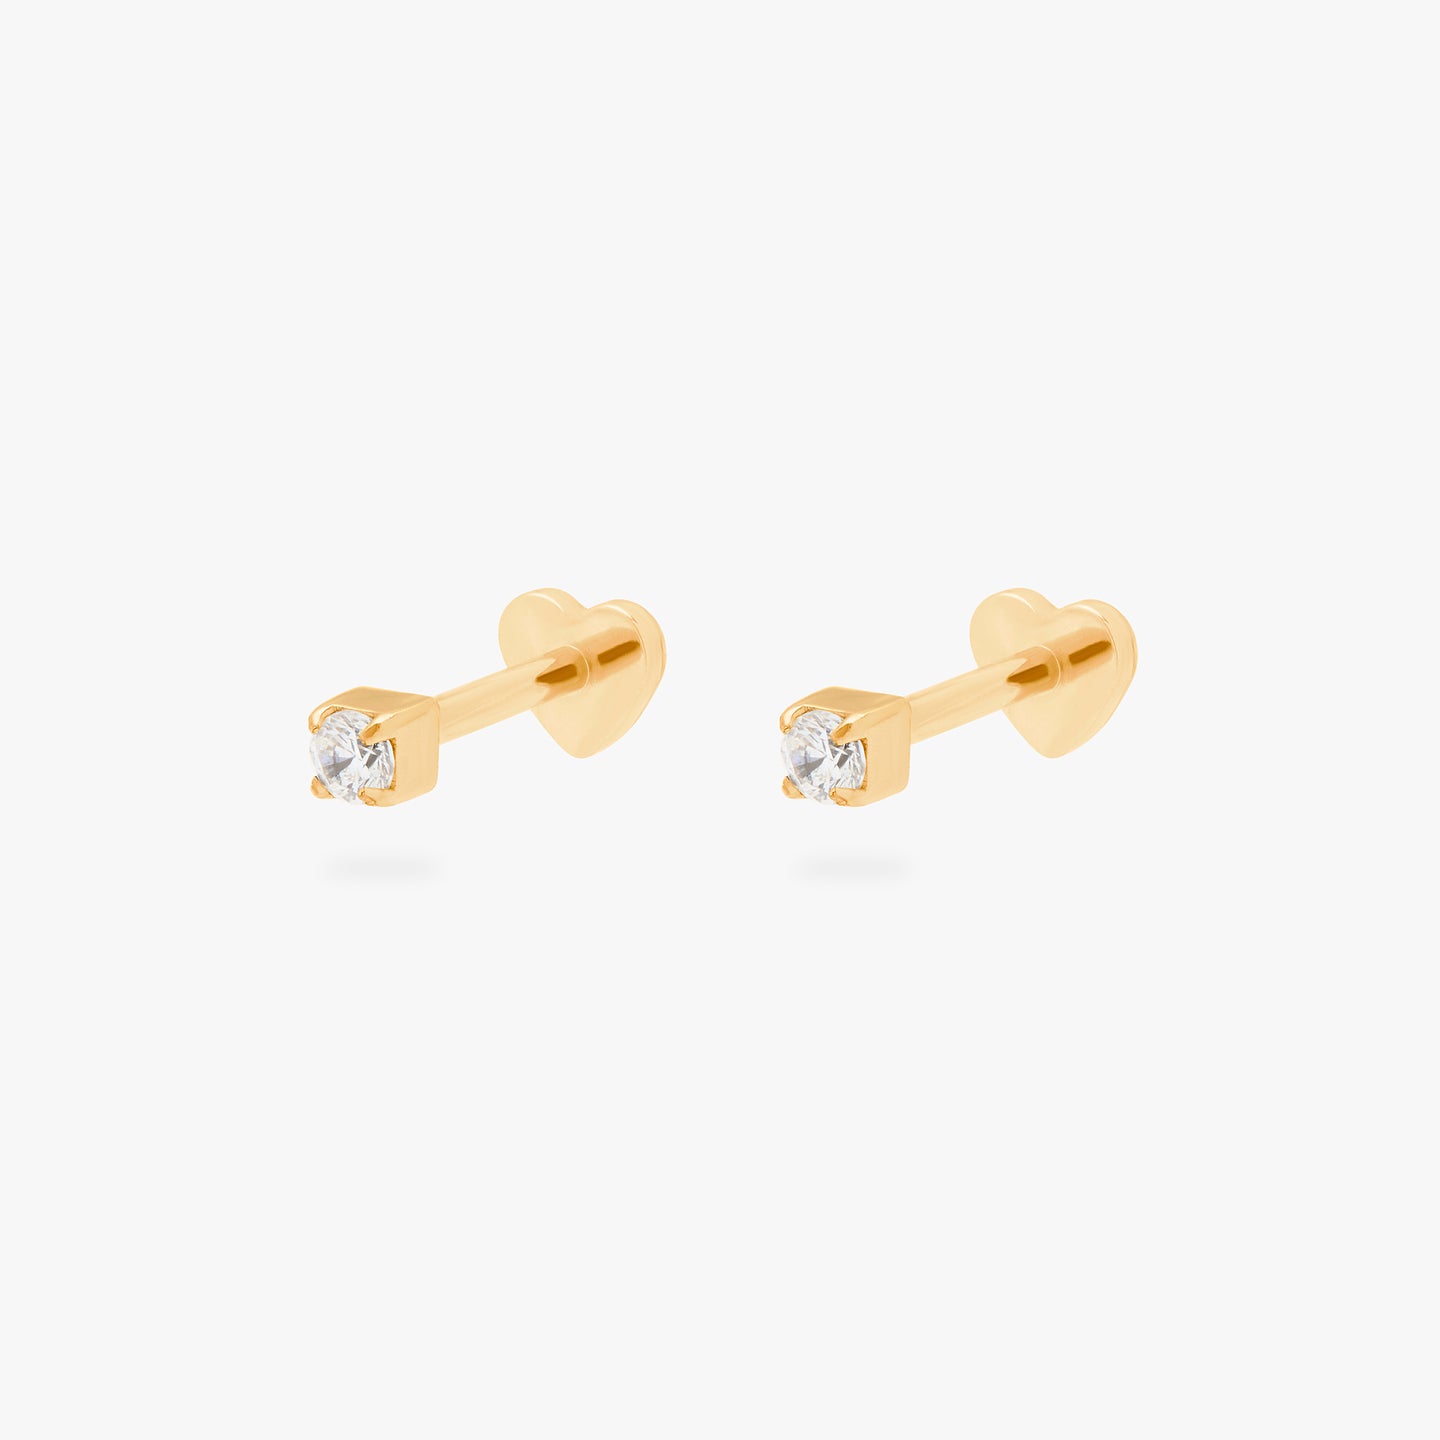 This is an image of a pair of gold/clear mini CZ flatback tops, with gold labrets with heart-shaped discs. [pair] color:null|gold/clear